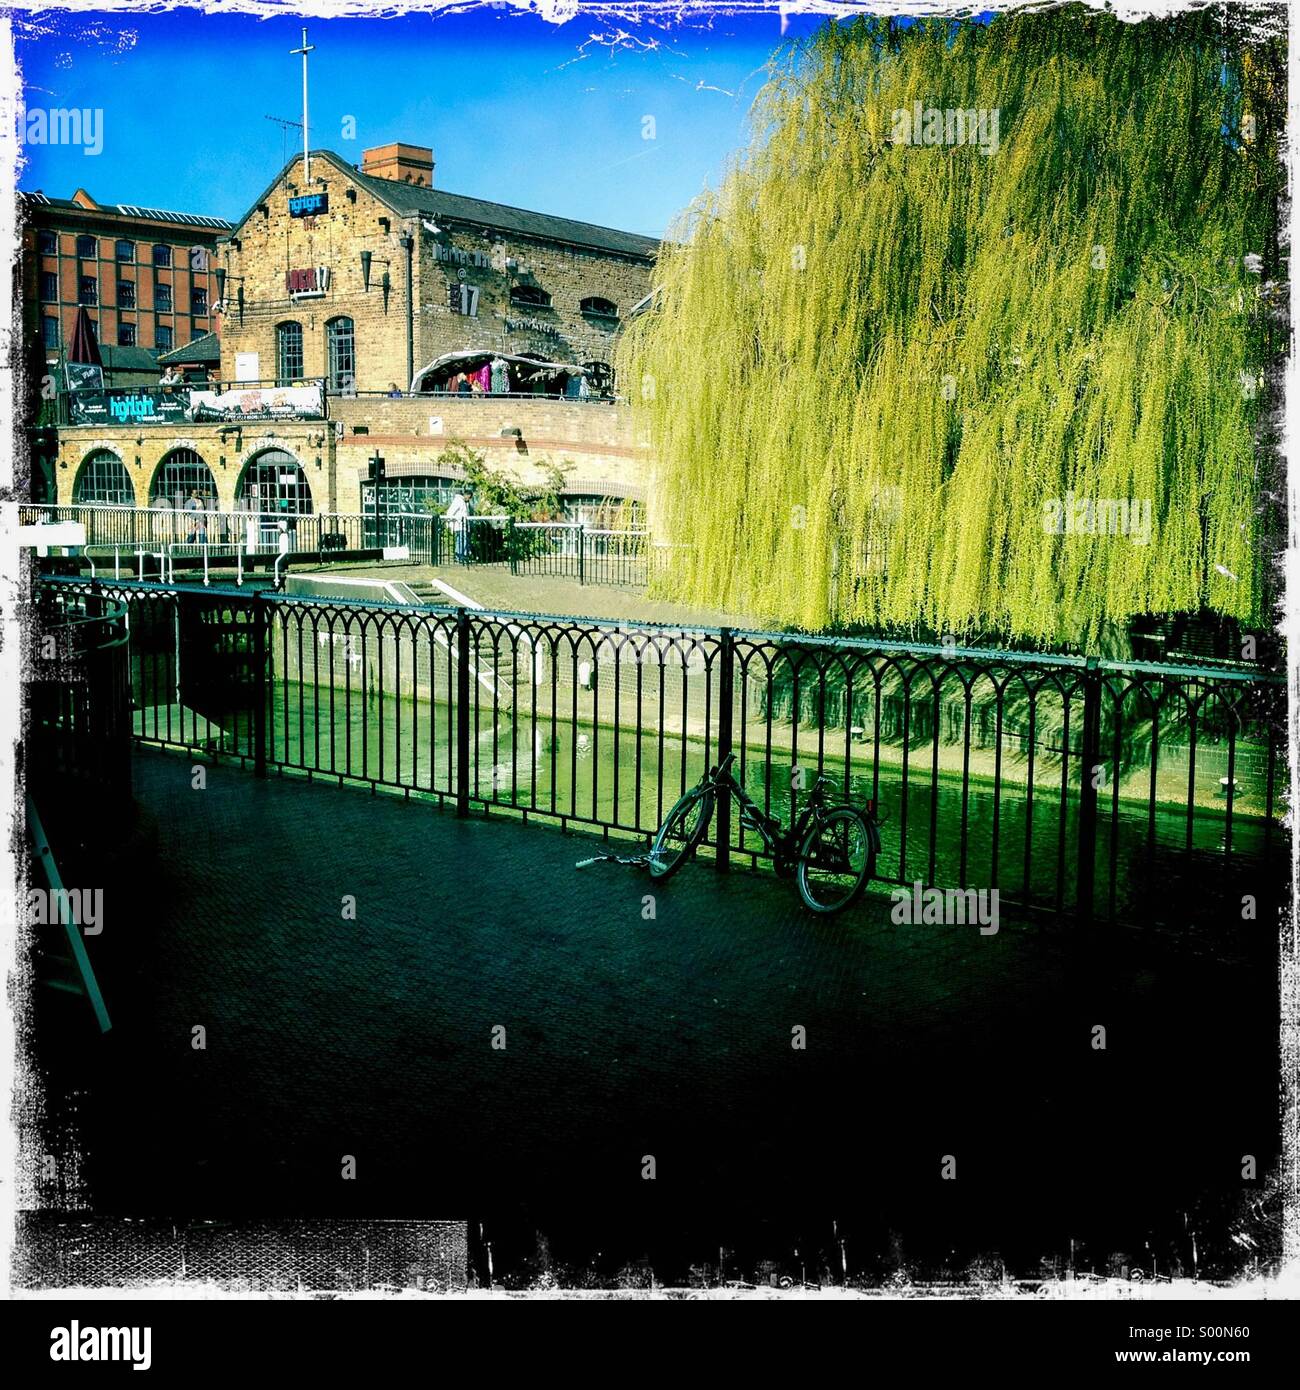 Camden Lock, Camden Town , London UK. Scene from bridge looking over lock with willow tree in mid ground and iron railings in the foreground. Hipstamatic, iPhone. Photo with white borders. Stock Photo